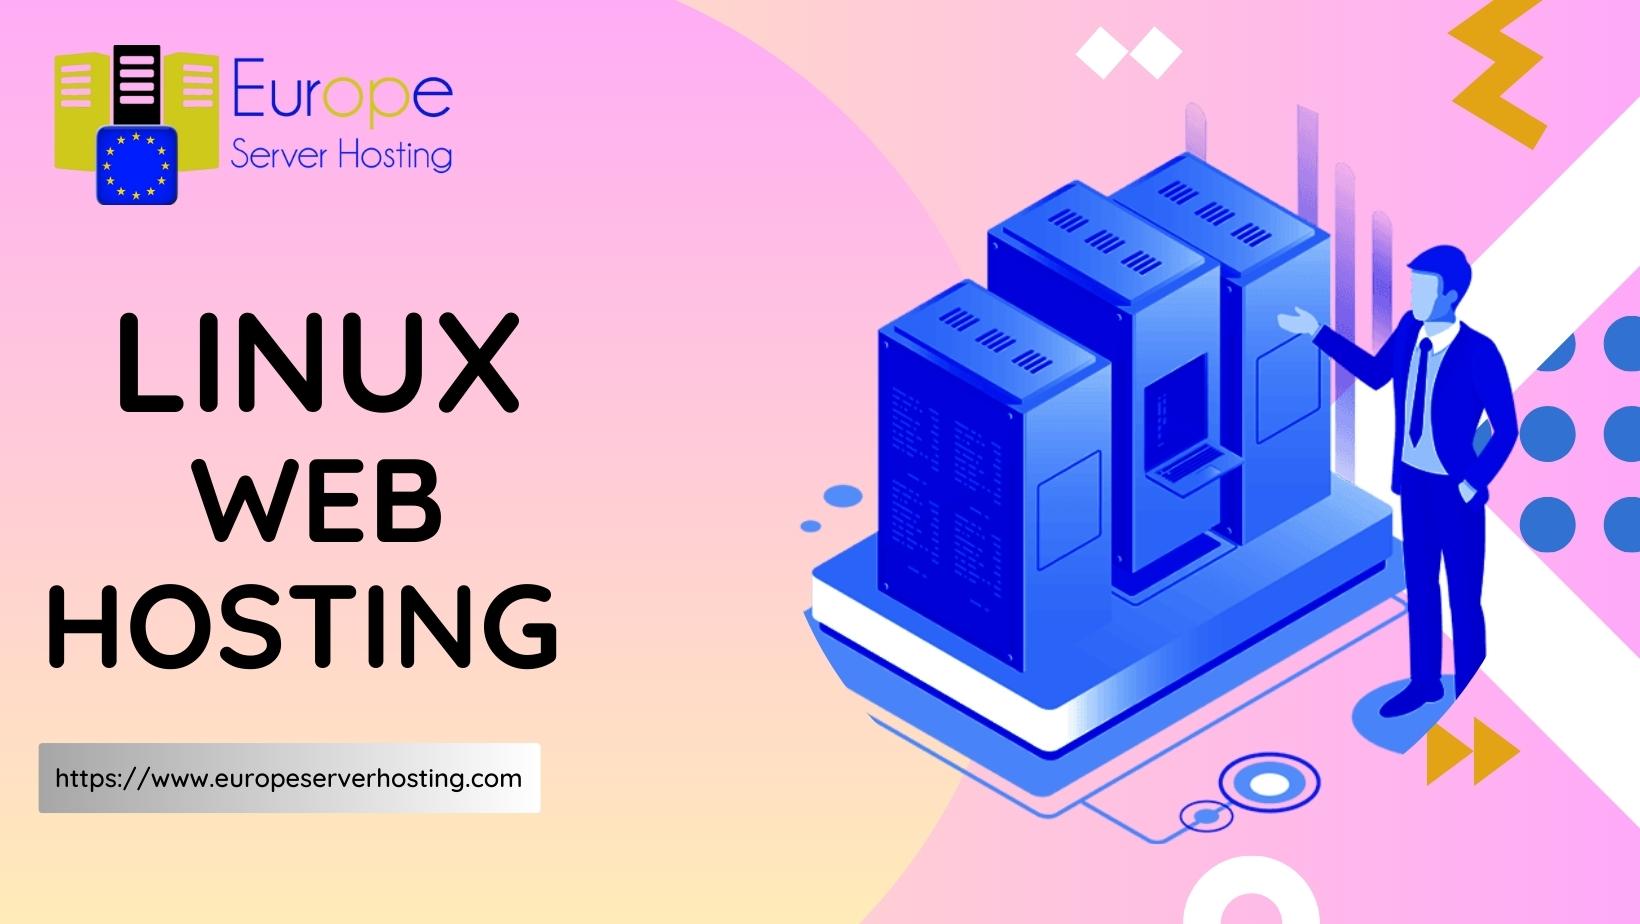 Linux web hosting offers a multitude of benefits that make it a compelling choice for hosting your website. Its cost-effectiveness, stability, security, compatibility, scalability, and strong community support make it an attractive option for businesses and individuals alike